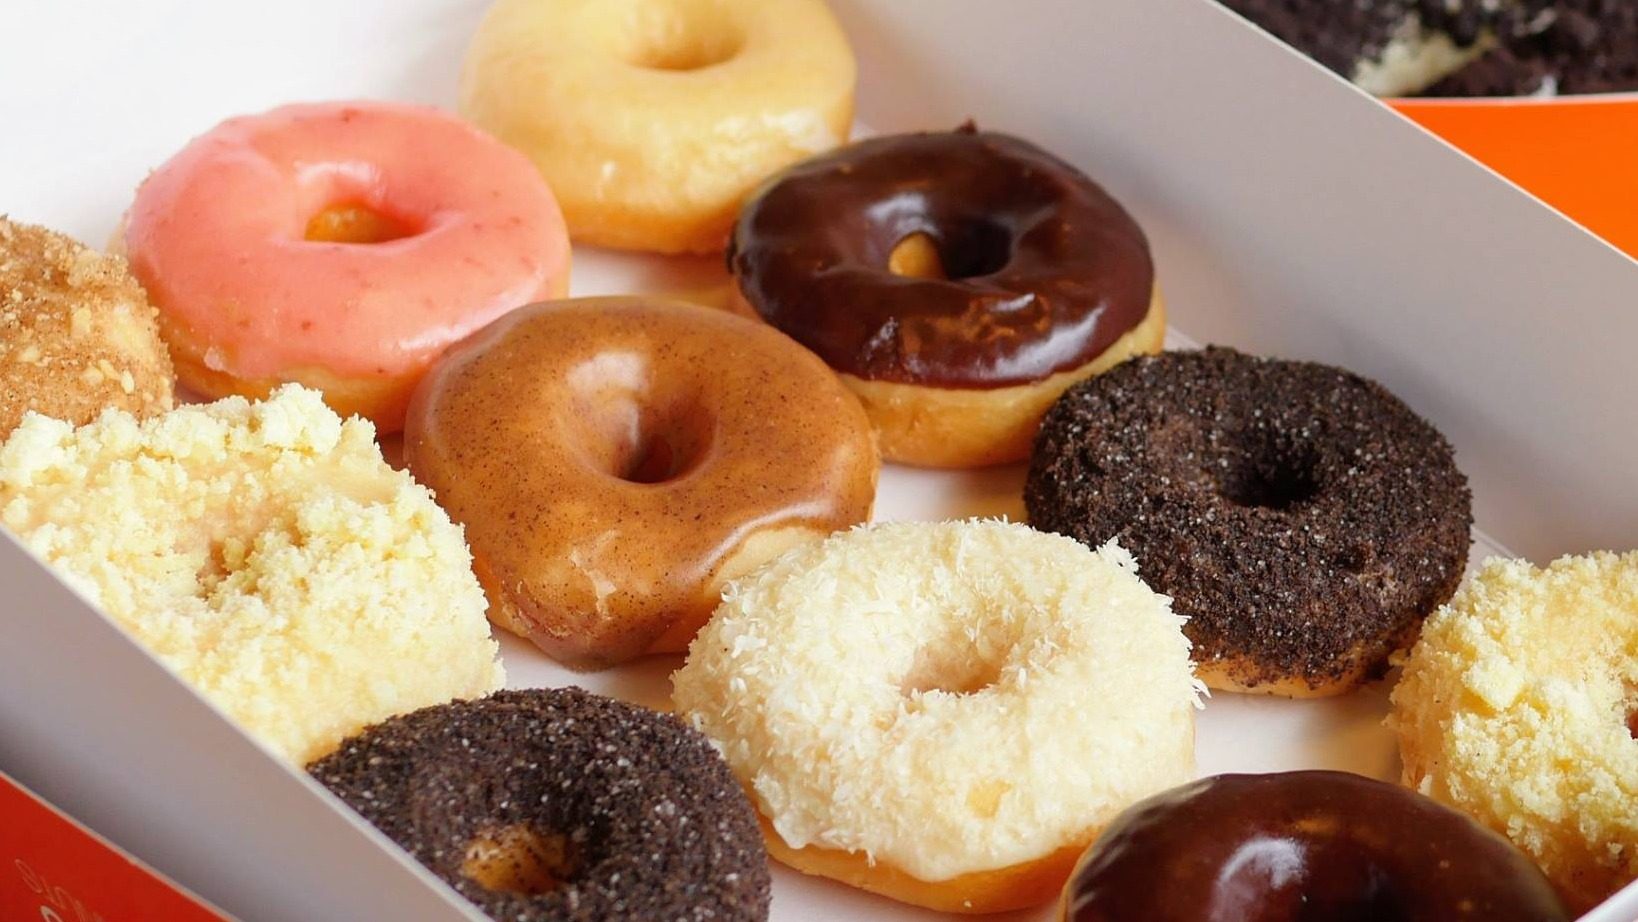 LIST: Where to get donuts for delivery